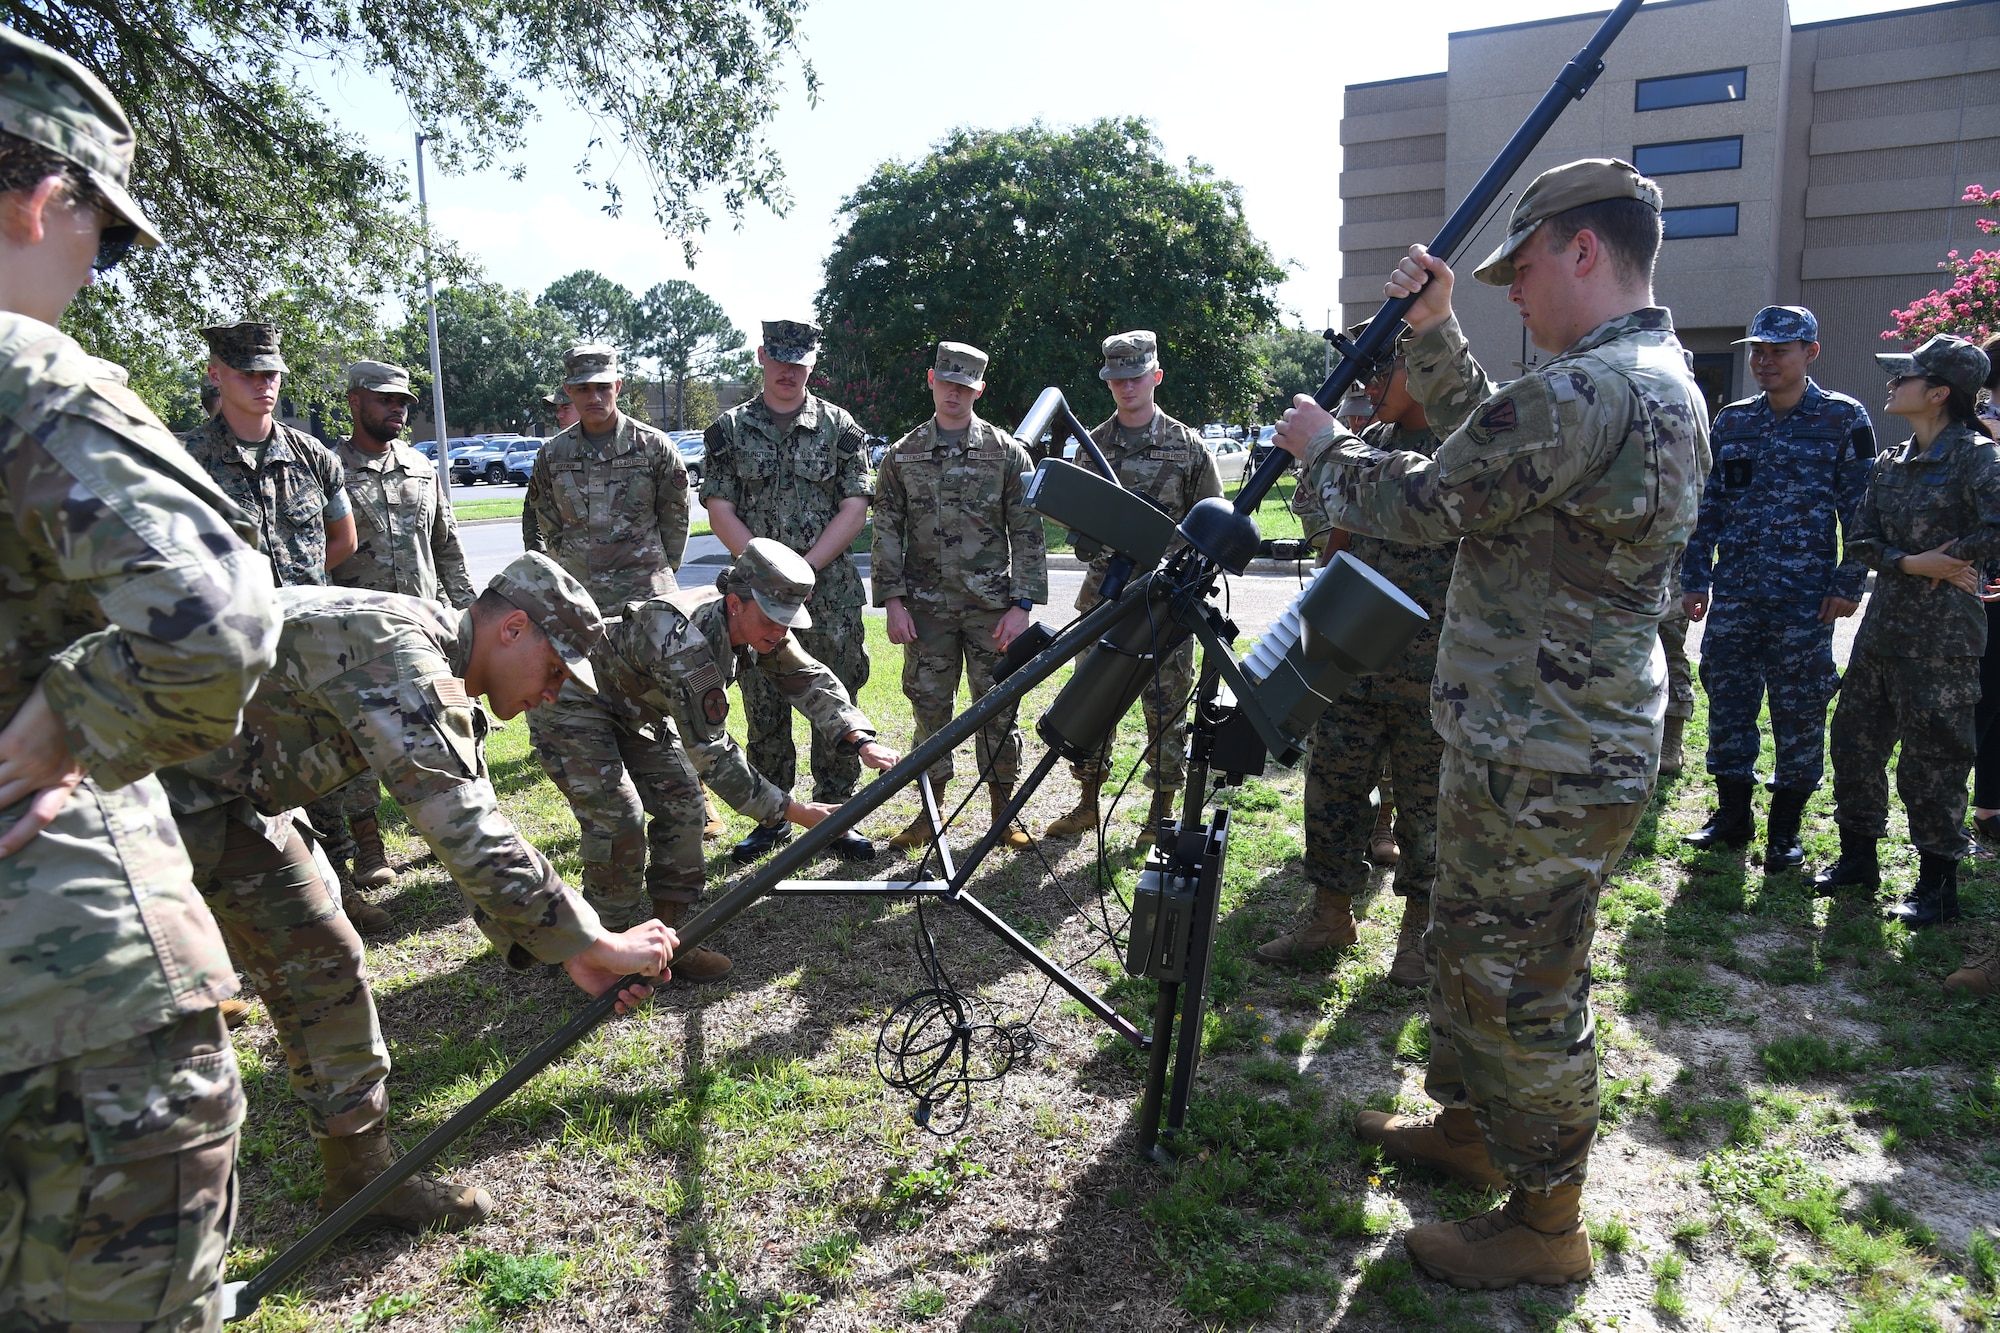 Airmen in the 335th Training Squadron assemble a TMQ-53 weather sensor during a training session outside of the Joint Weather Training Facility at Keesler Air Force Base, Mississippi, July 21, 2022. The weather apprentice course, which graduated 650 students this past year, takes 151 academic days to complete. Approximately 7,400 students go through the 335th TRS's 13 Air Force Specialty Codes each year. (U.S. Air Force photo by Kemberly Groue)